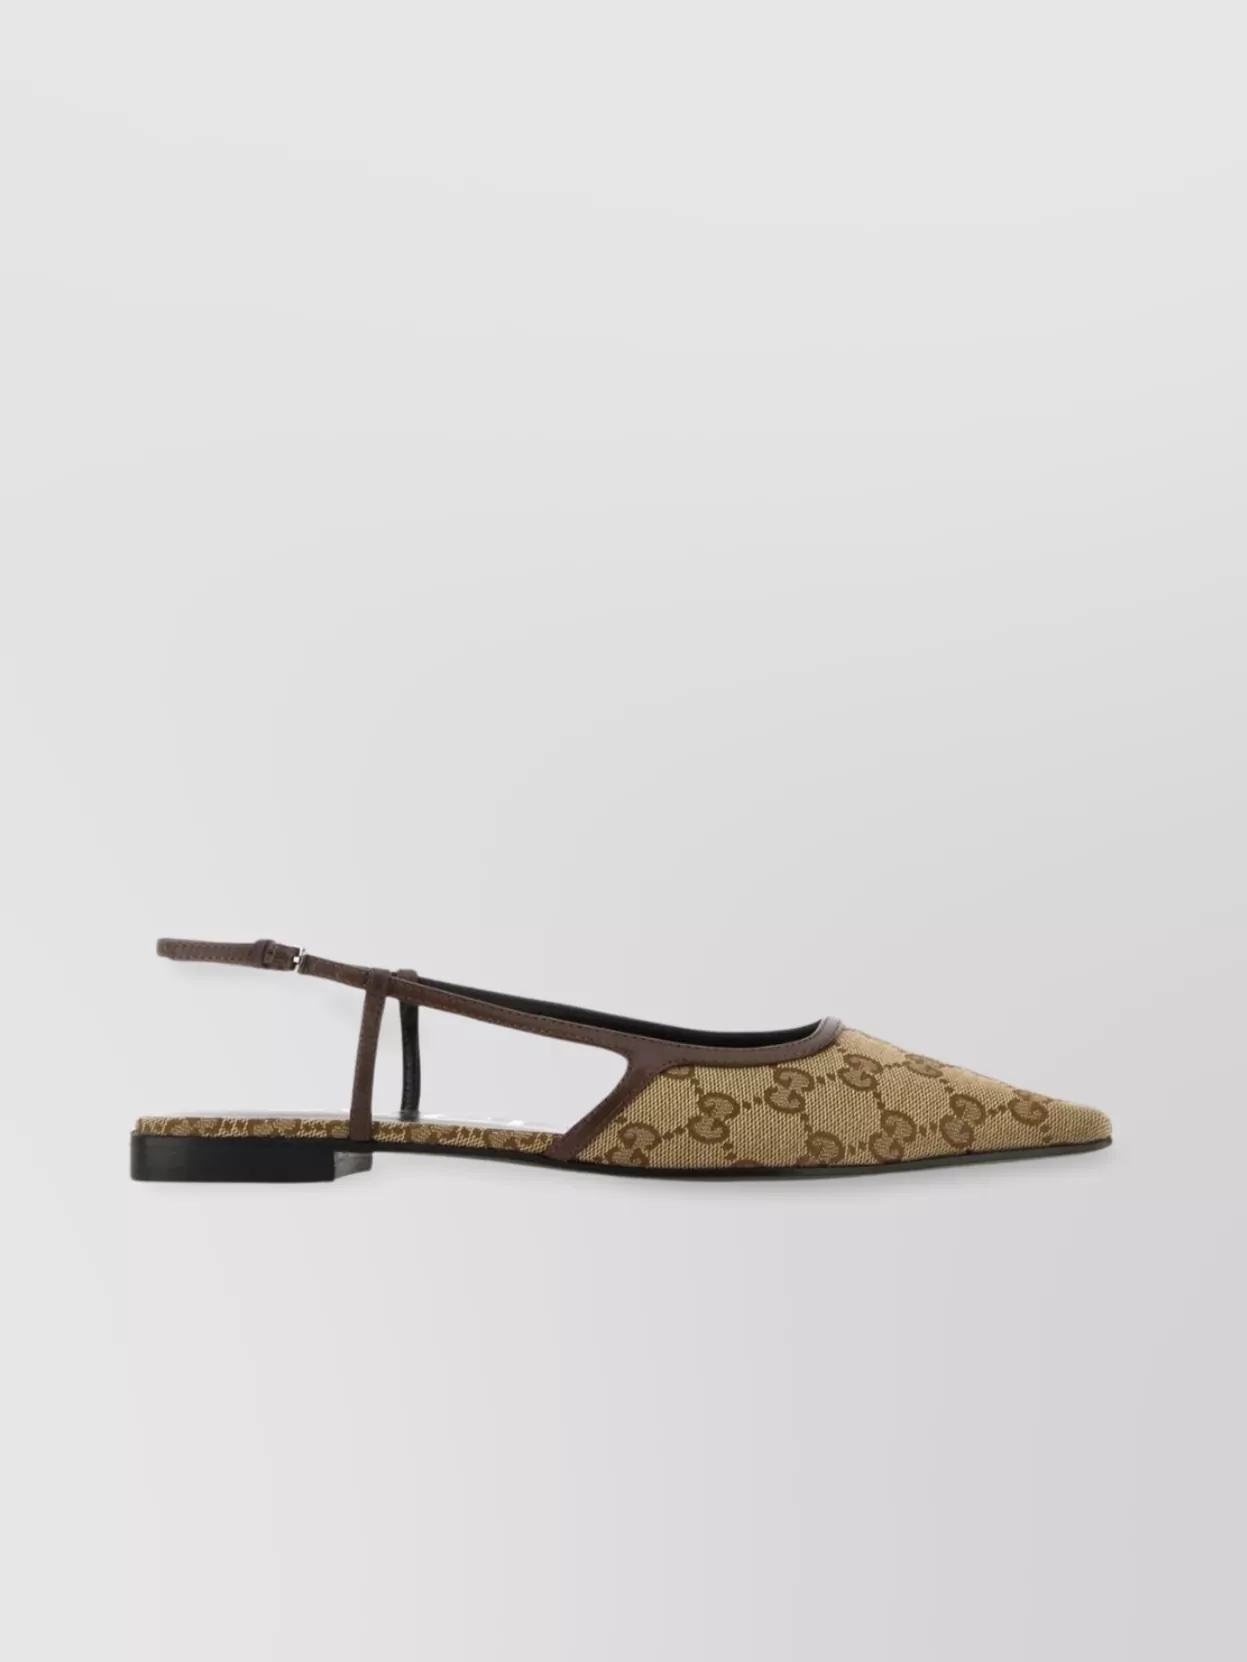 GUCCI POINTED-TOE PATTERNED FABRIC BALLET FLATS